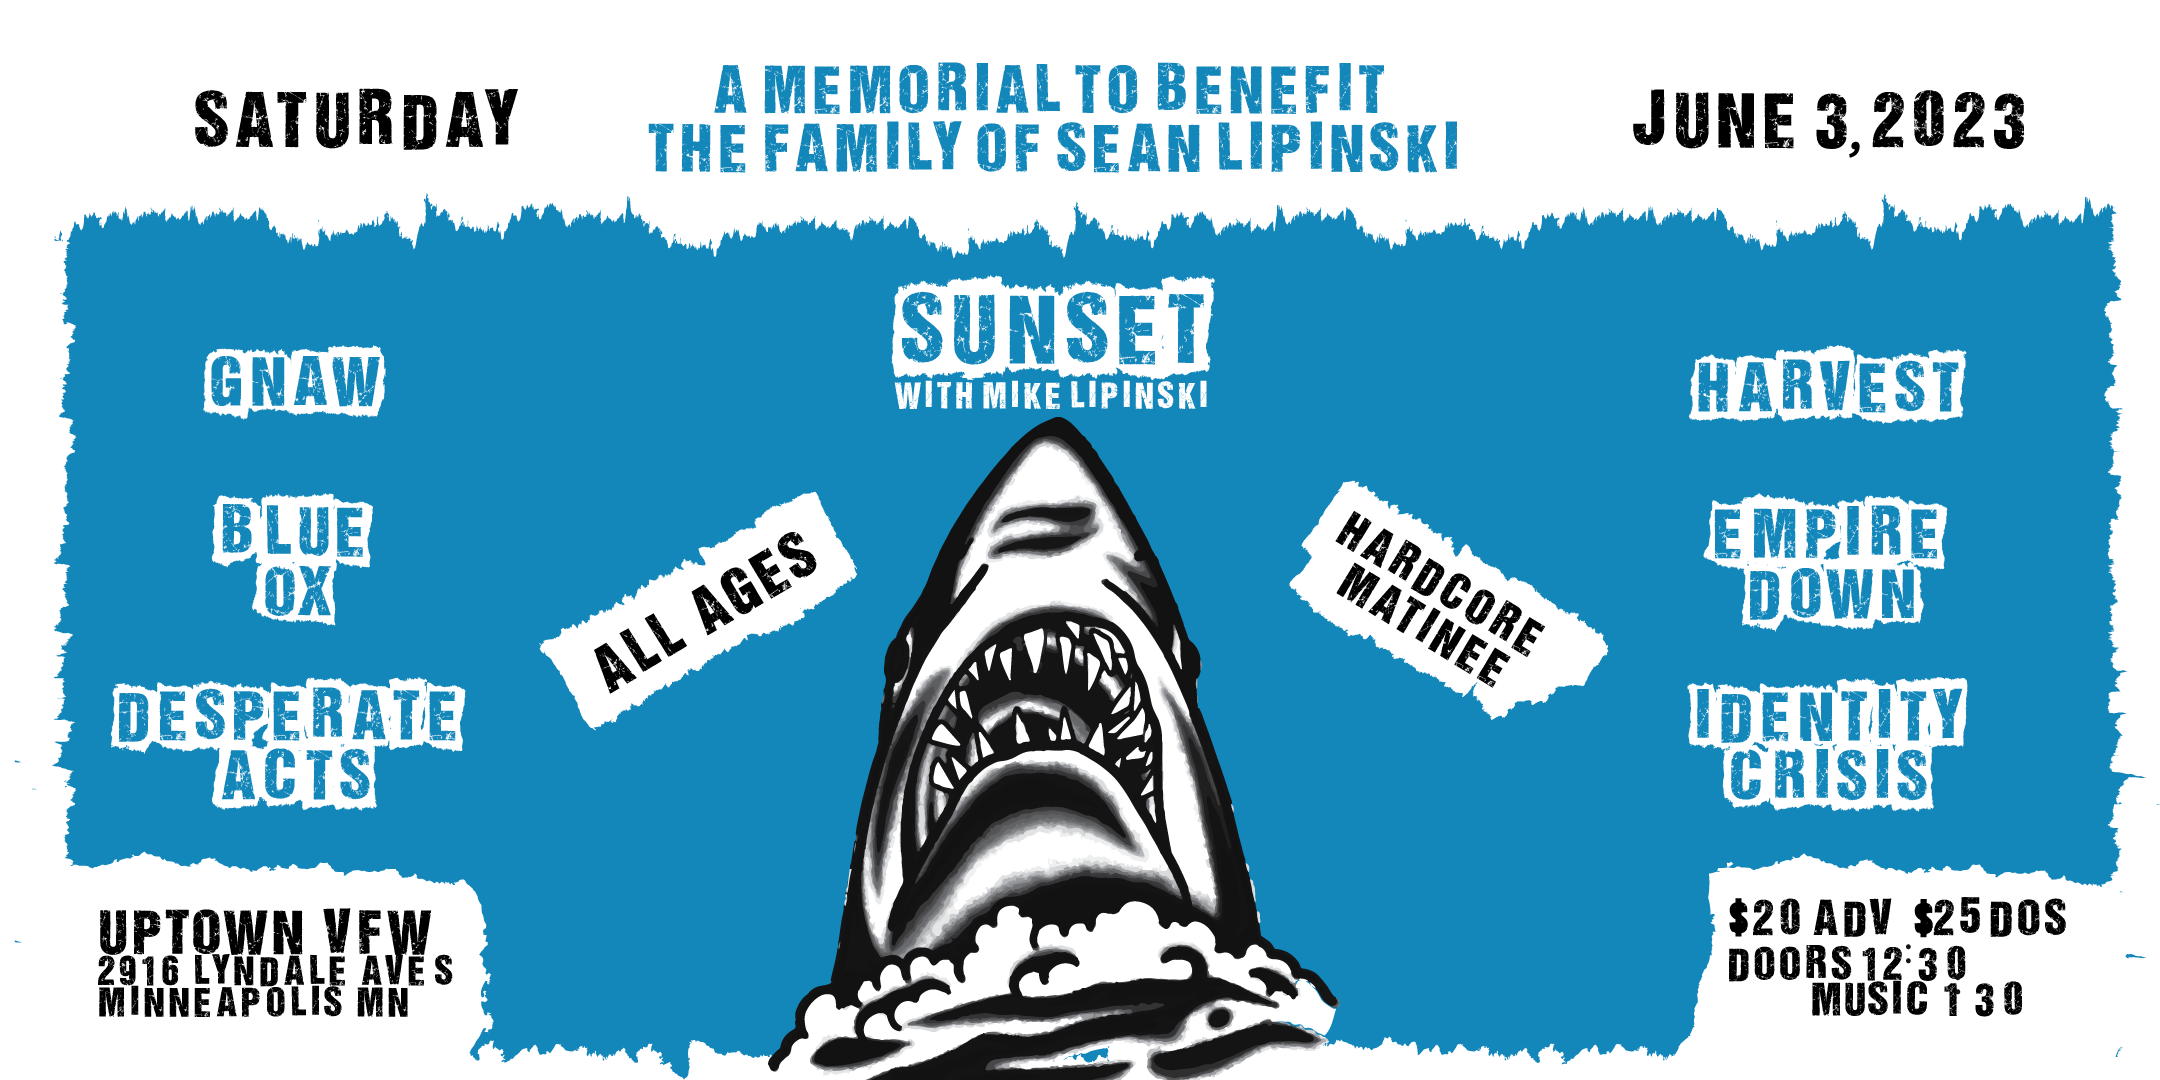 A Memorial Show to Benefit Sean Lipinski's Family Sunset Gnaw Harvest Empire Down Blue Ox Desparate Acts Identity Crisis Saturday June 3 James Ballentine "Uptown" VFW Post 246 Doors 12:30pm :: Music 1:30pm :: ALL AGES GA $20 ADV / $25 DOS NO REFUNDS